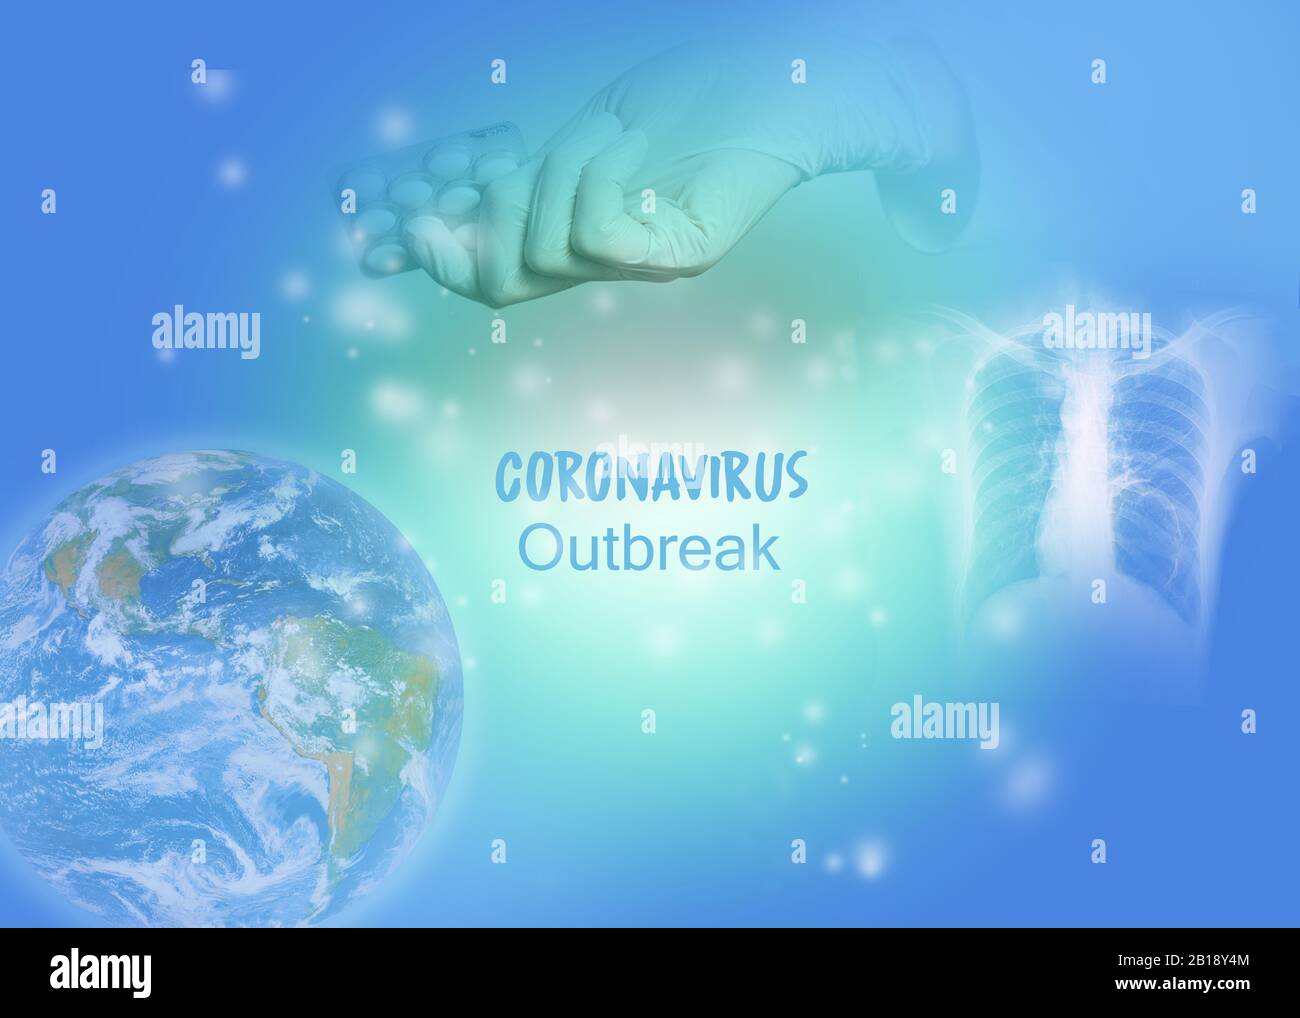 Doctor research Medicine solution for Coronavirus treatment find the outbreak Stock Photo